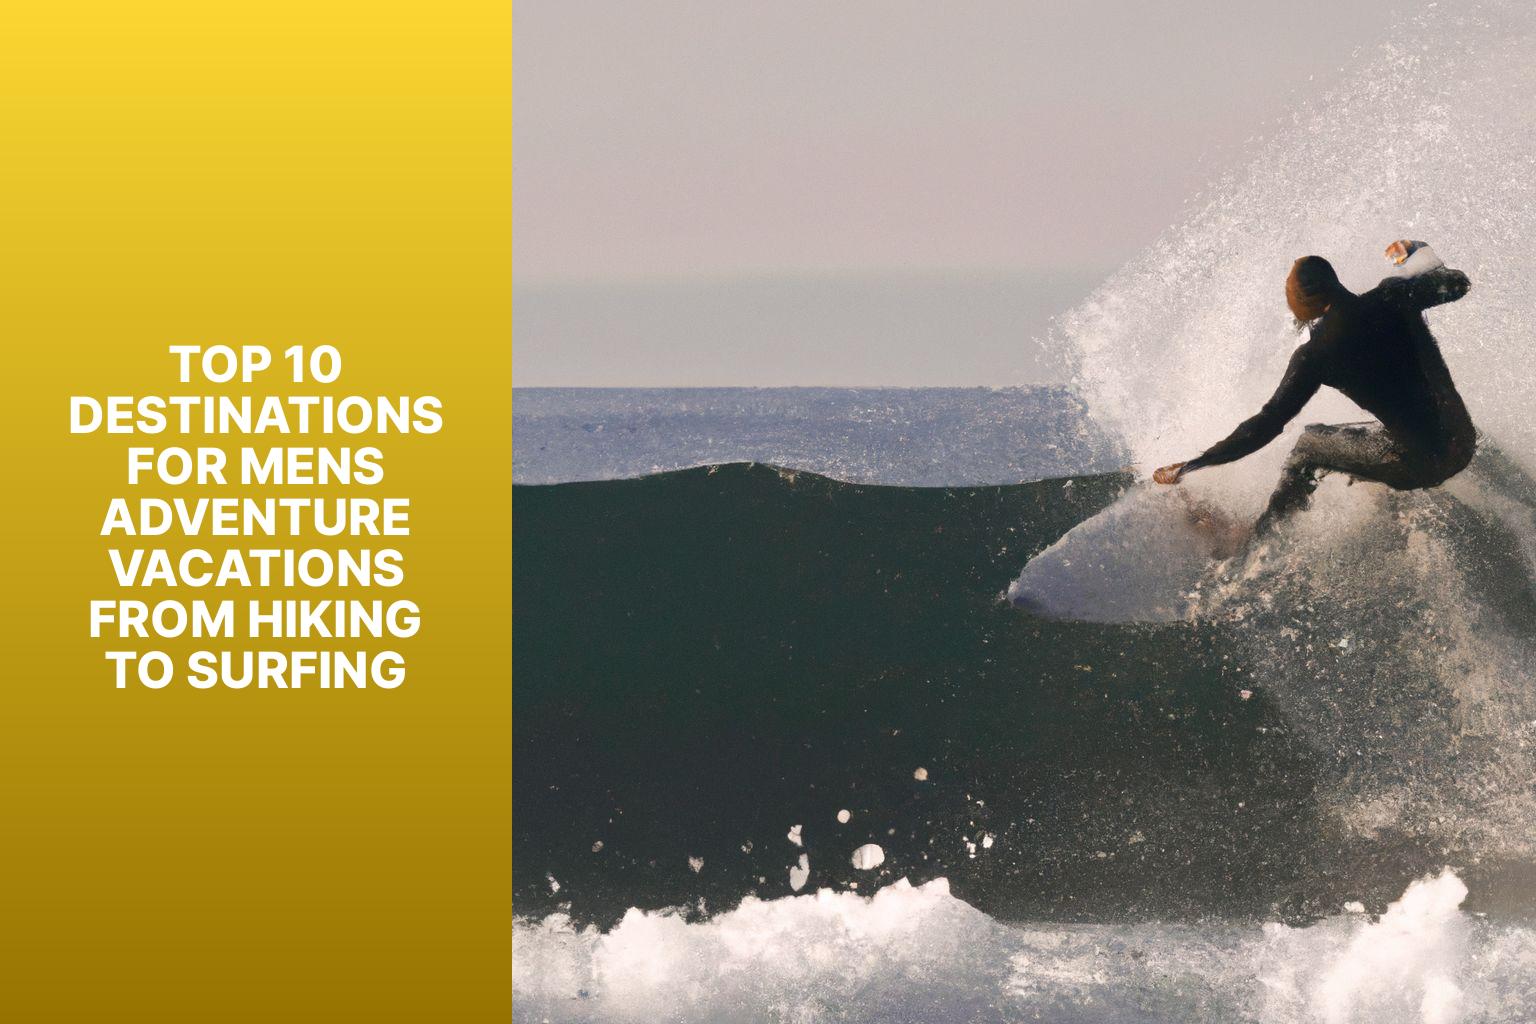 Top 10 Destinations for Men’s Adventure Vacations: From Hiking to Surfing